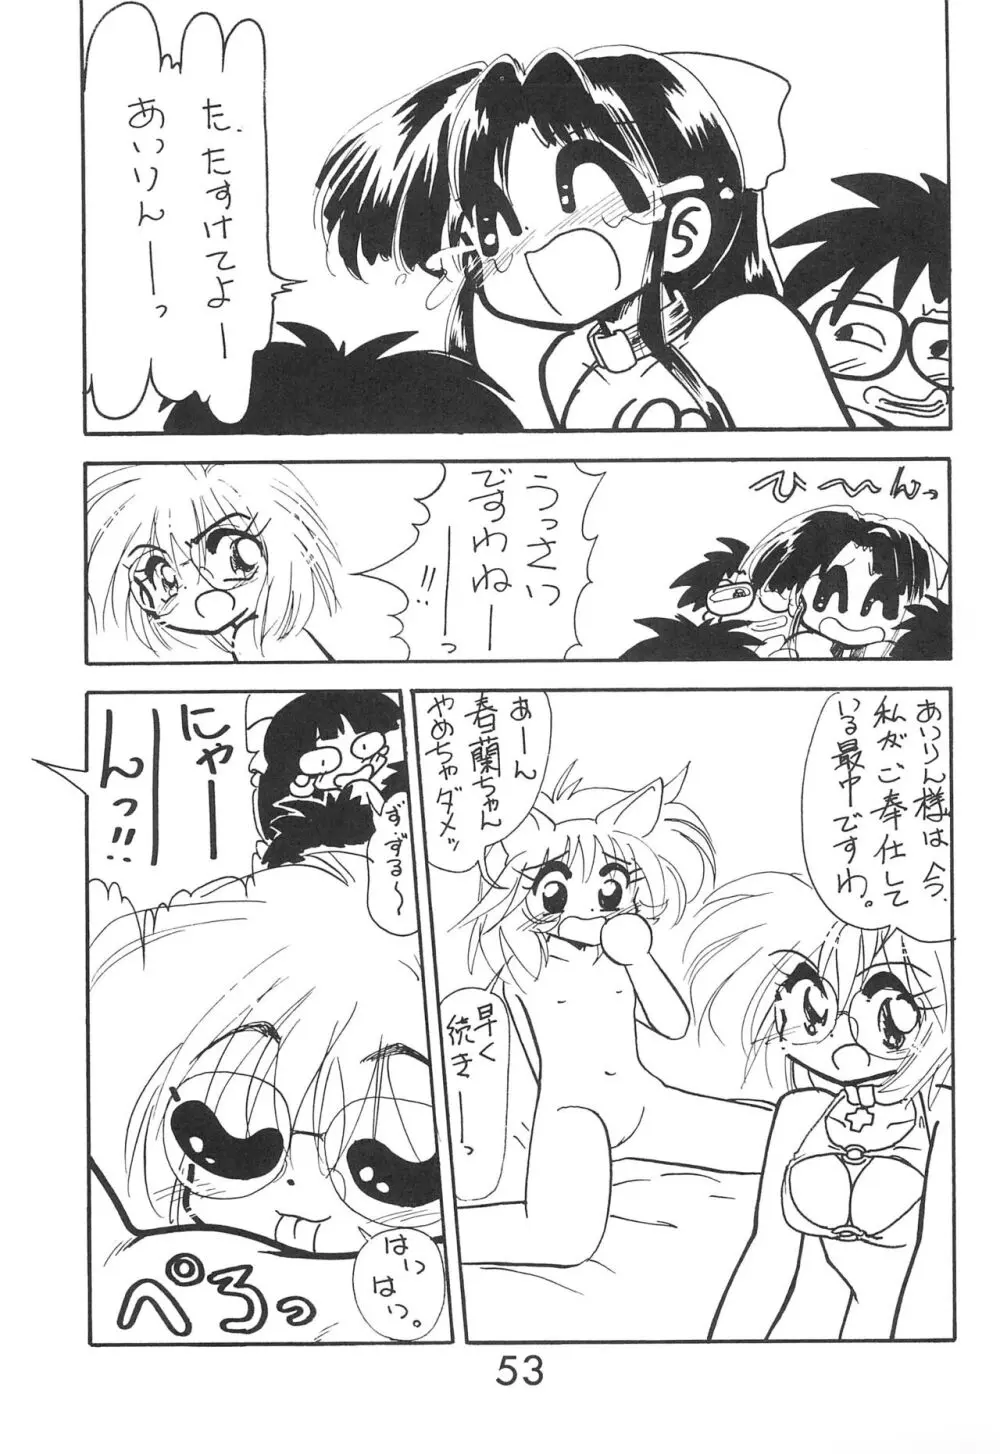 Fun House 9th Chame! - page53